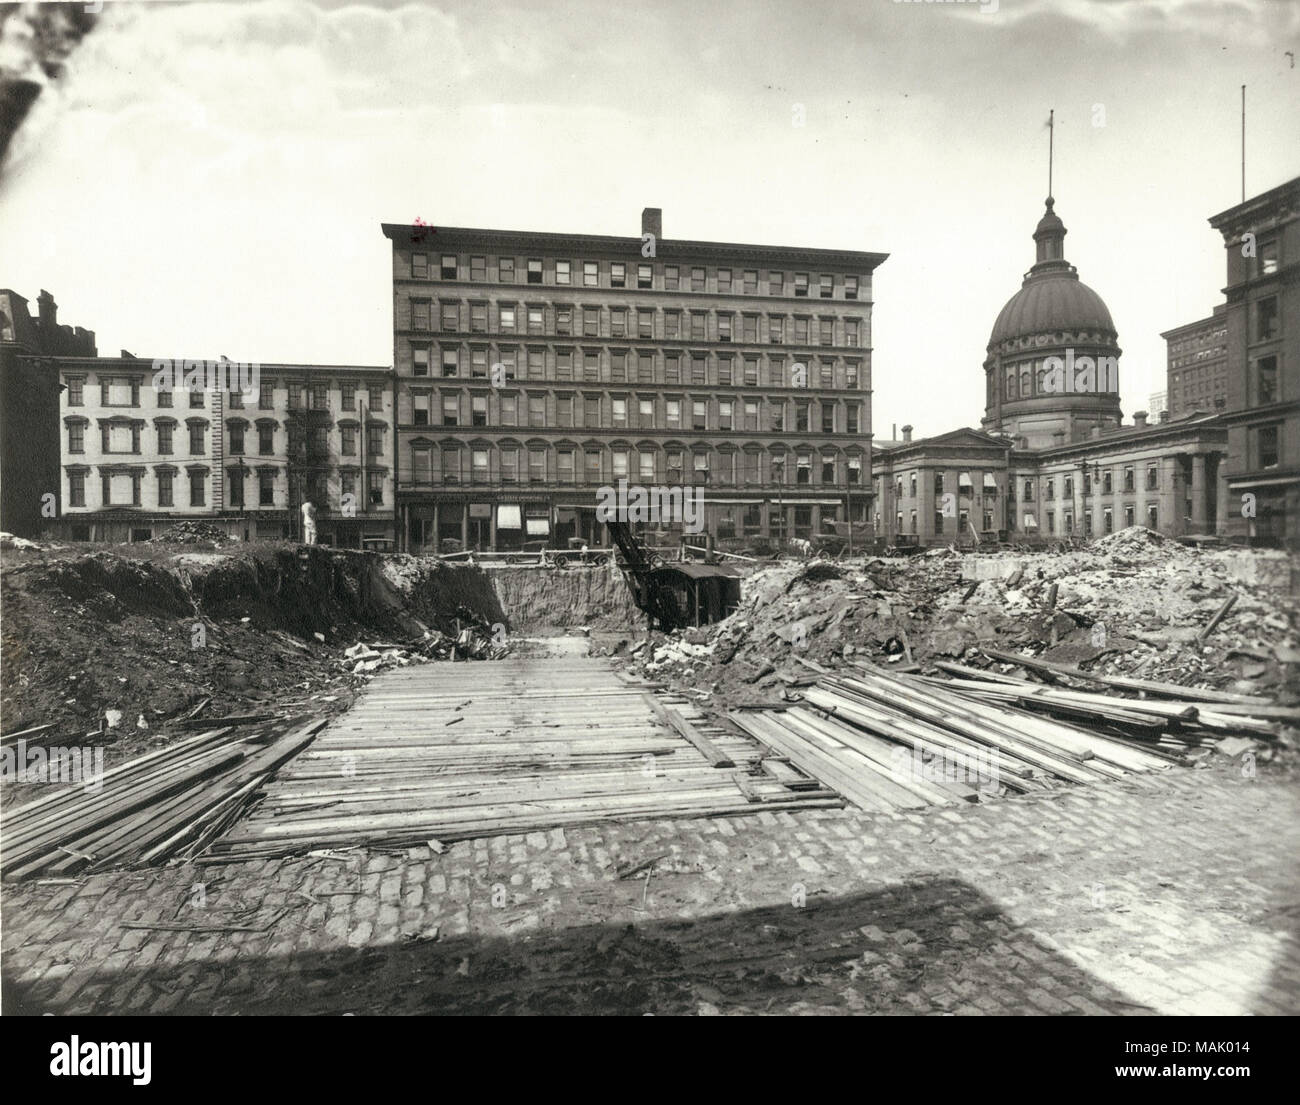 Excavation for the International Fur Exchange building on the southeast corner of Fourth and Market Streets. The Old Court House is visible at right. St. Louis was a major fur trading center during the 19th and 20th centuries. The International Fur Exchange Building is the only building still standing from St. Louis' fur trading heyday. Around the time this building was constructed, 60-70 Excavation for the International Fur Exchange building on the southeast corner of Fourth and Market Streets.  . 1919. F.M. White Stock Photo